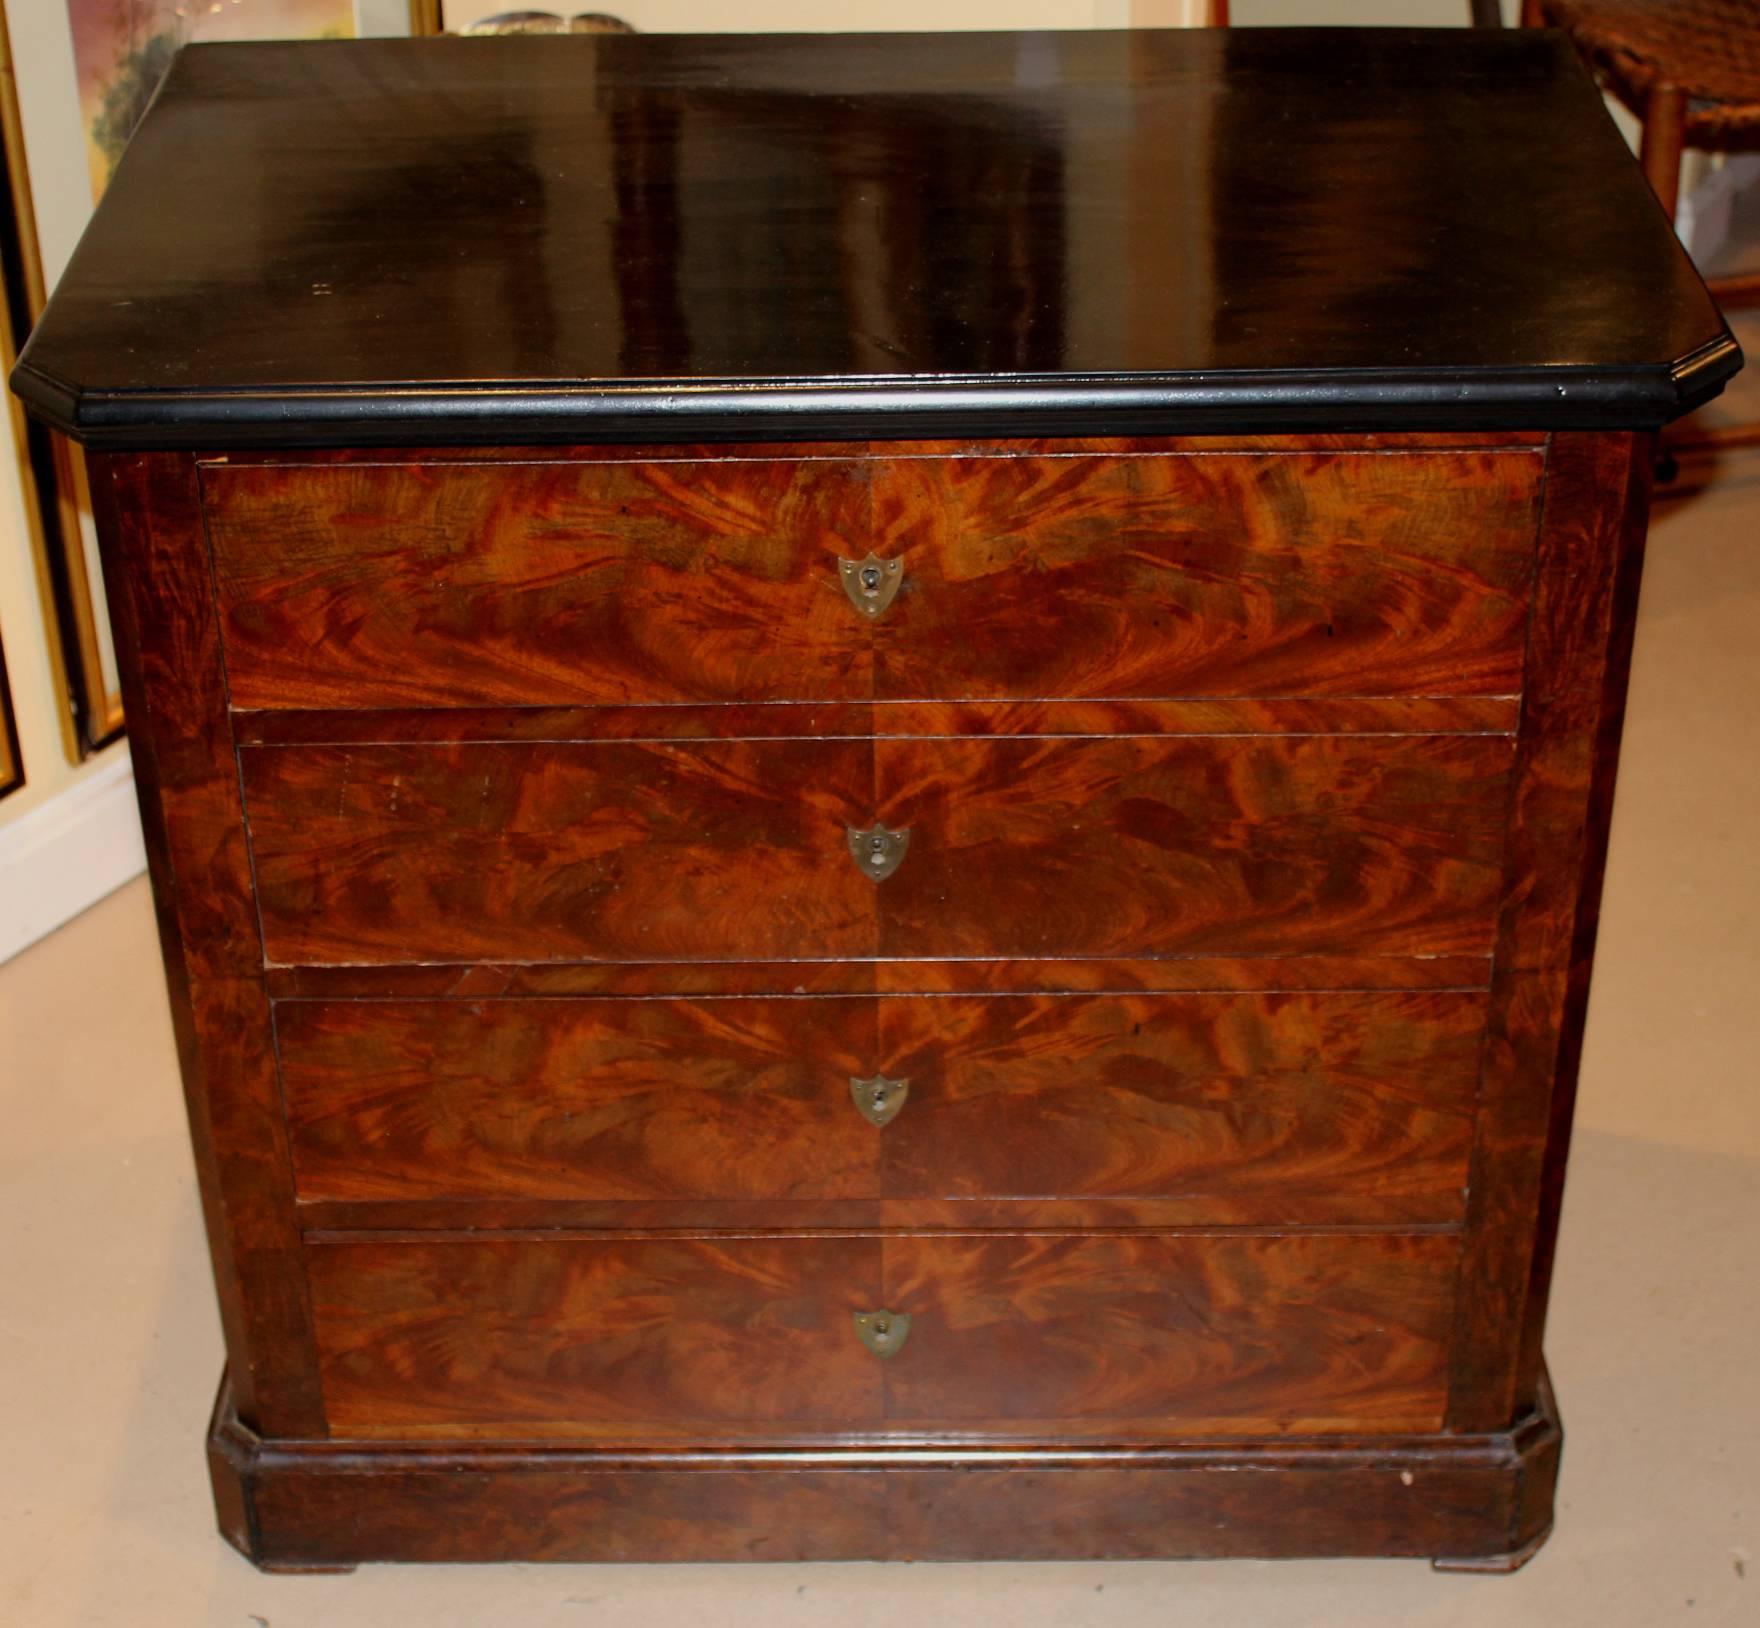 This near pair of 19th century Empire chests has book matched mahogany drawer fronts, chamfered corners, ebonized wooden tops, and brass shield form escutcheons and molded bases. 